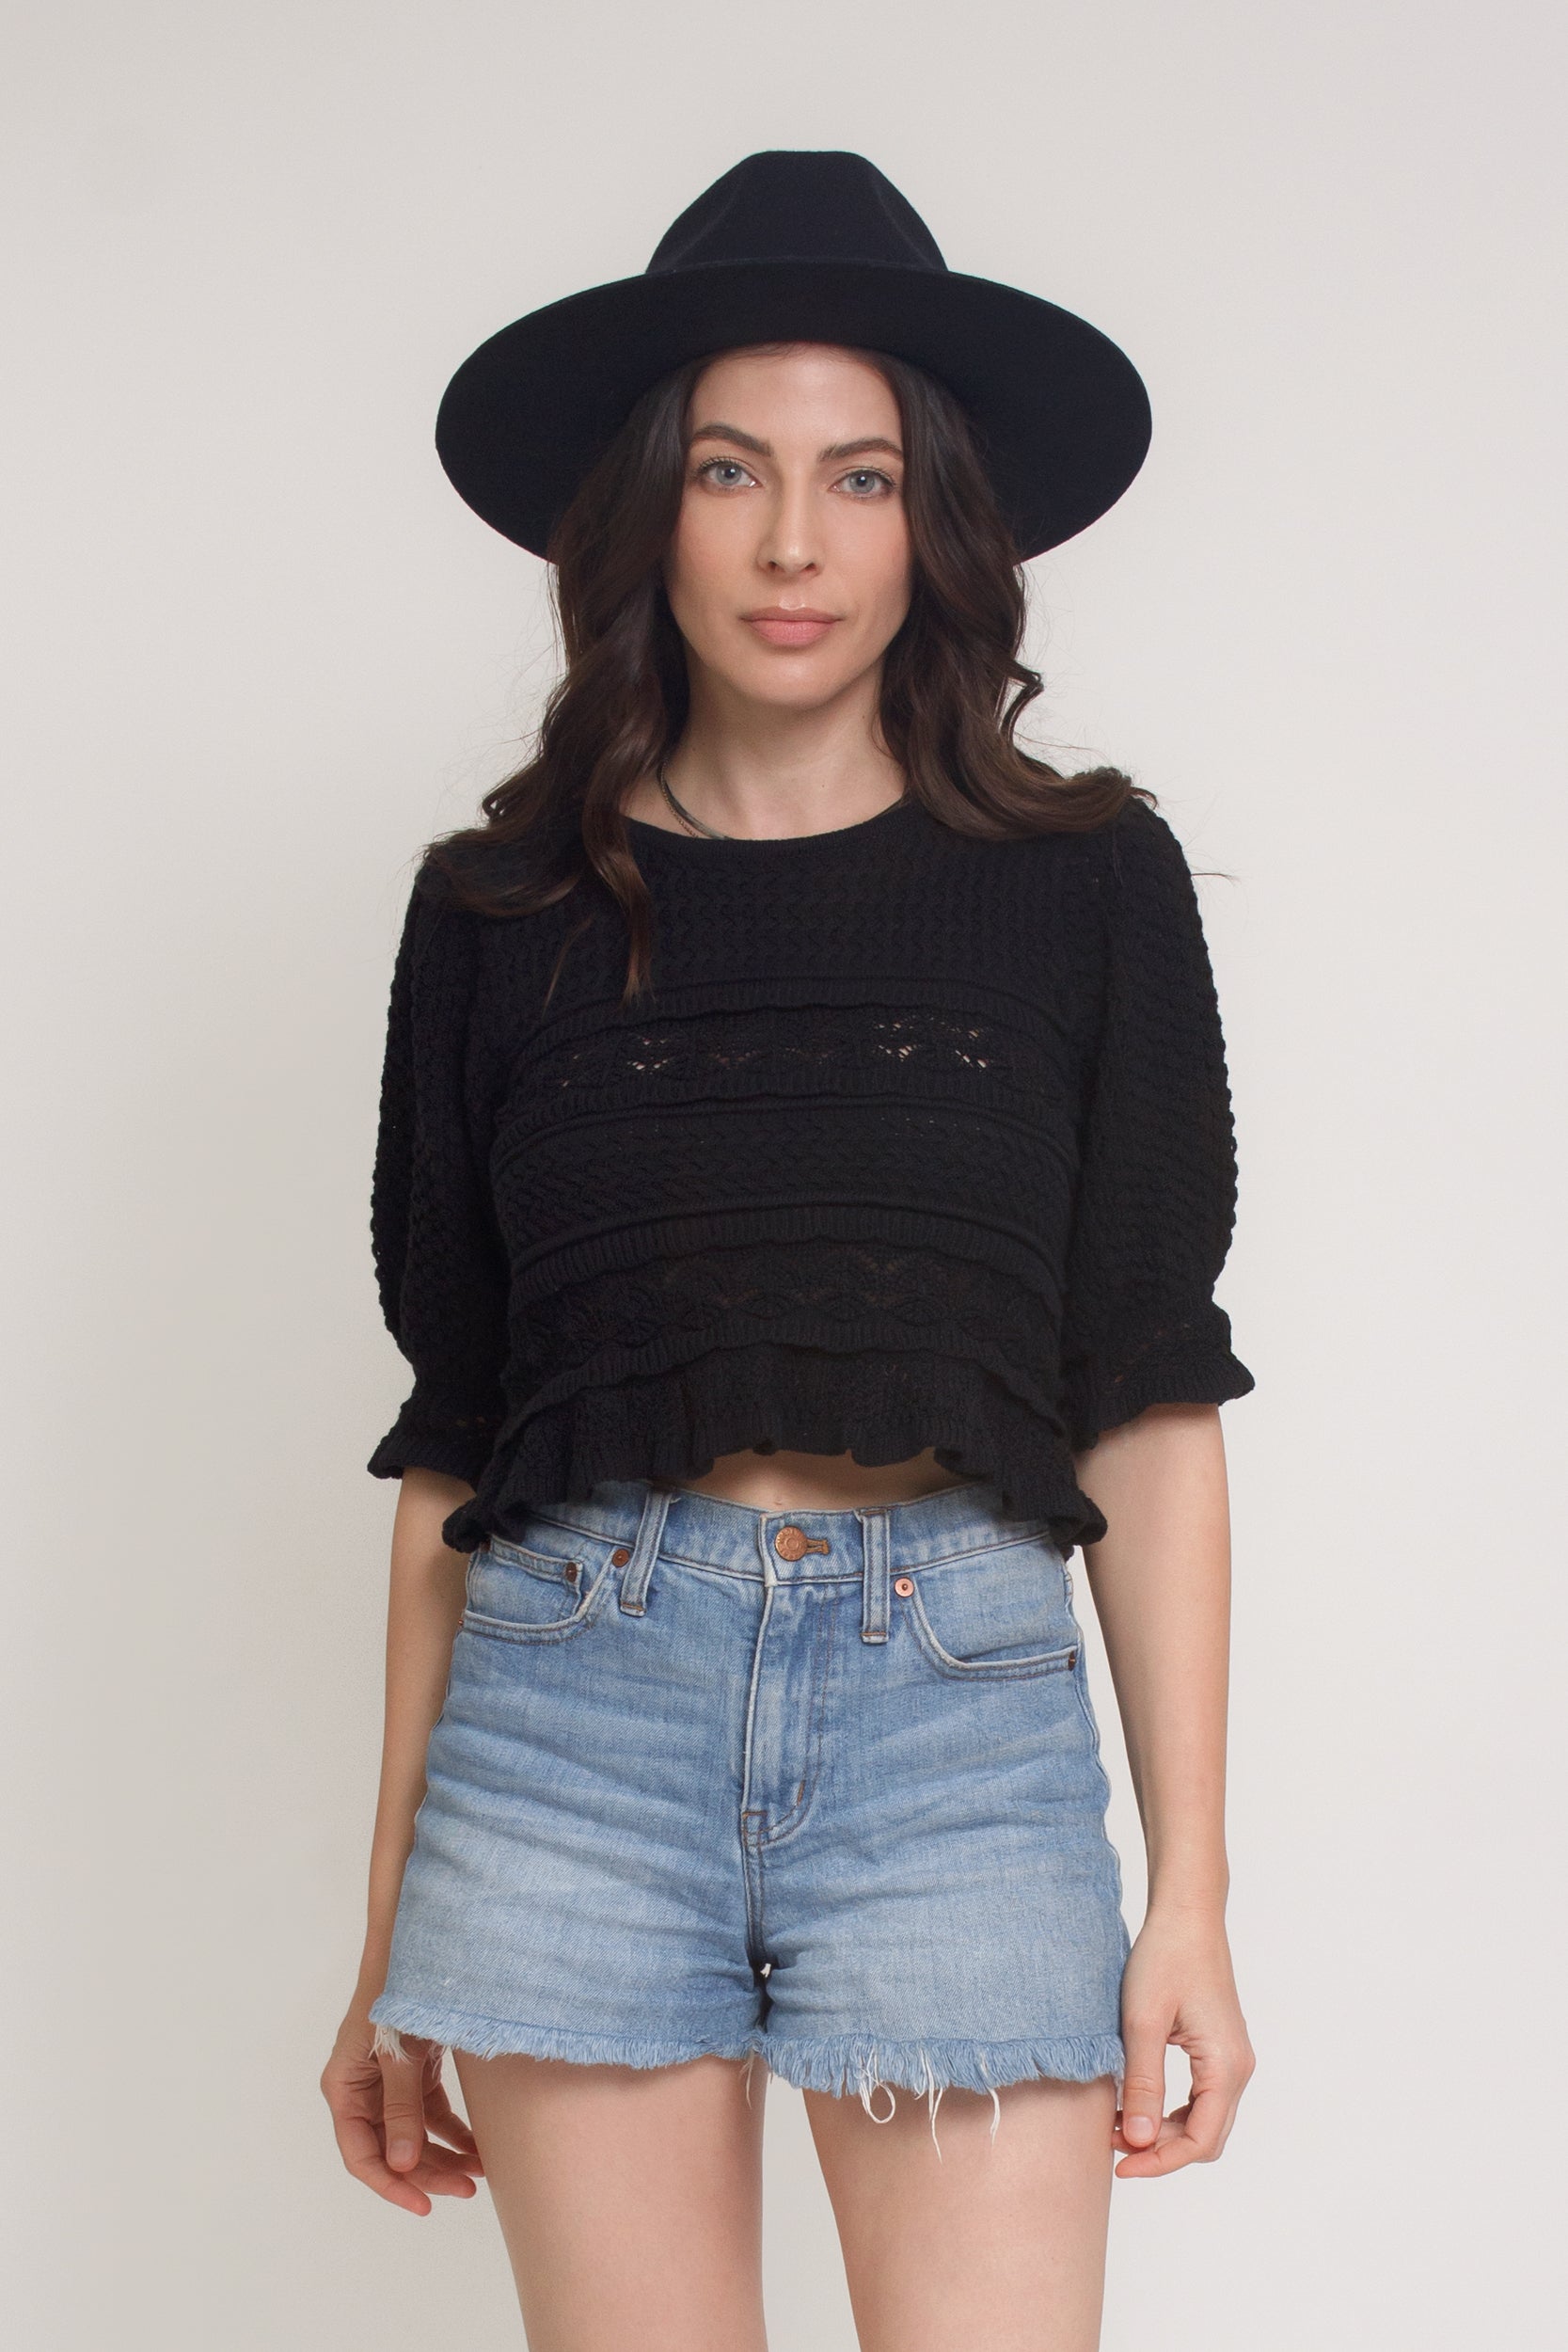 Jacquard sweater top with puff sleeves, in black.